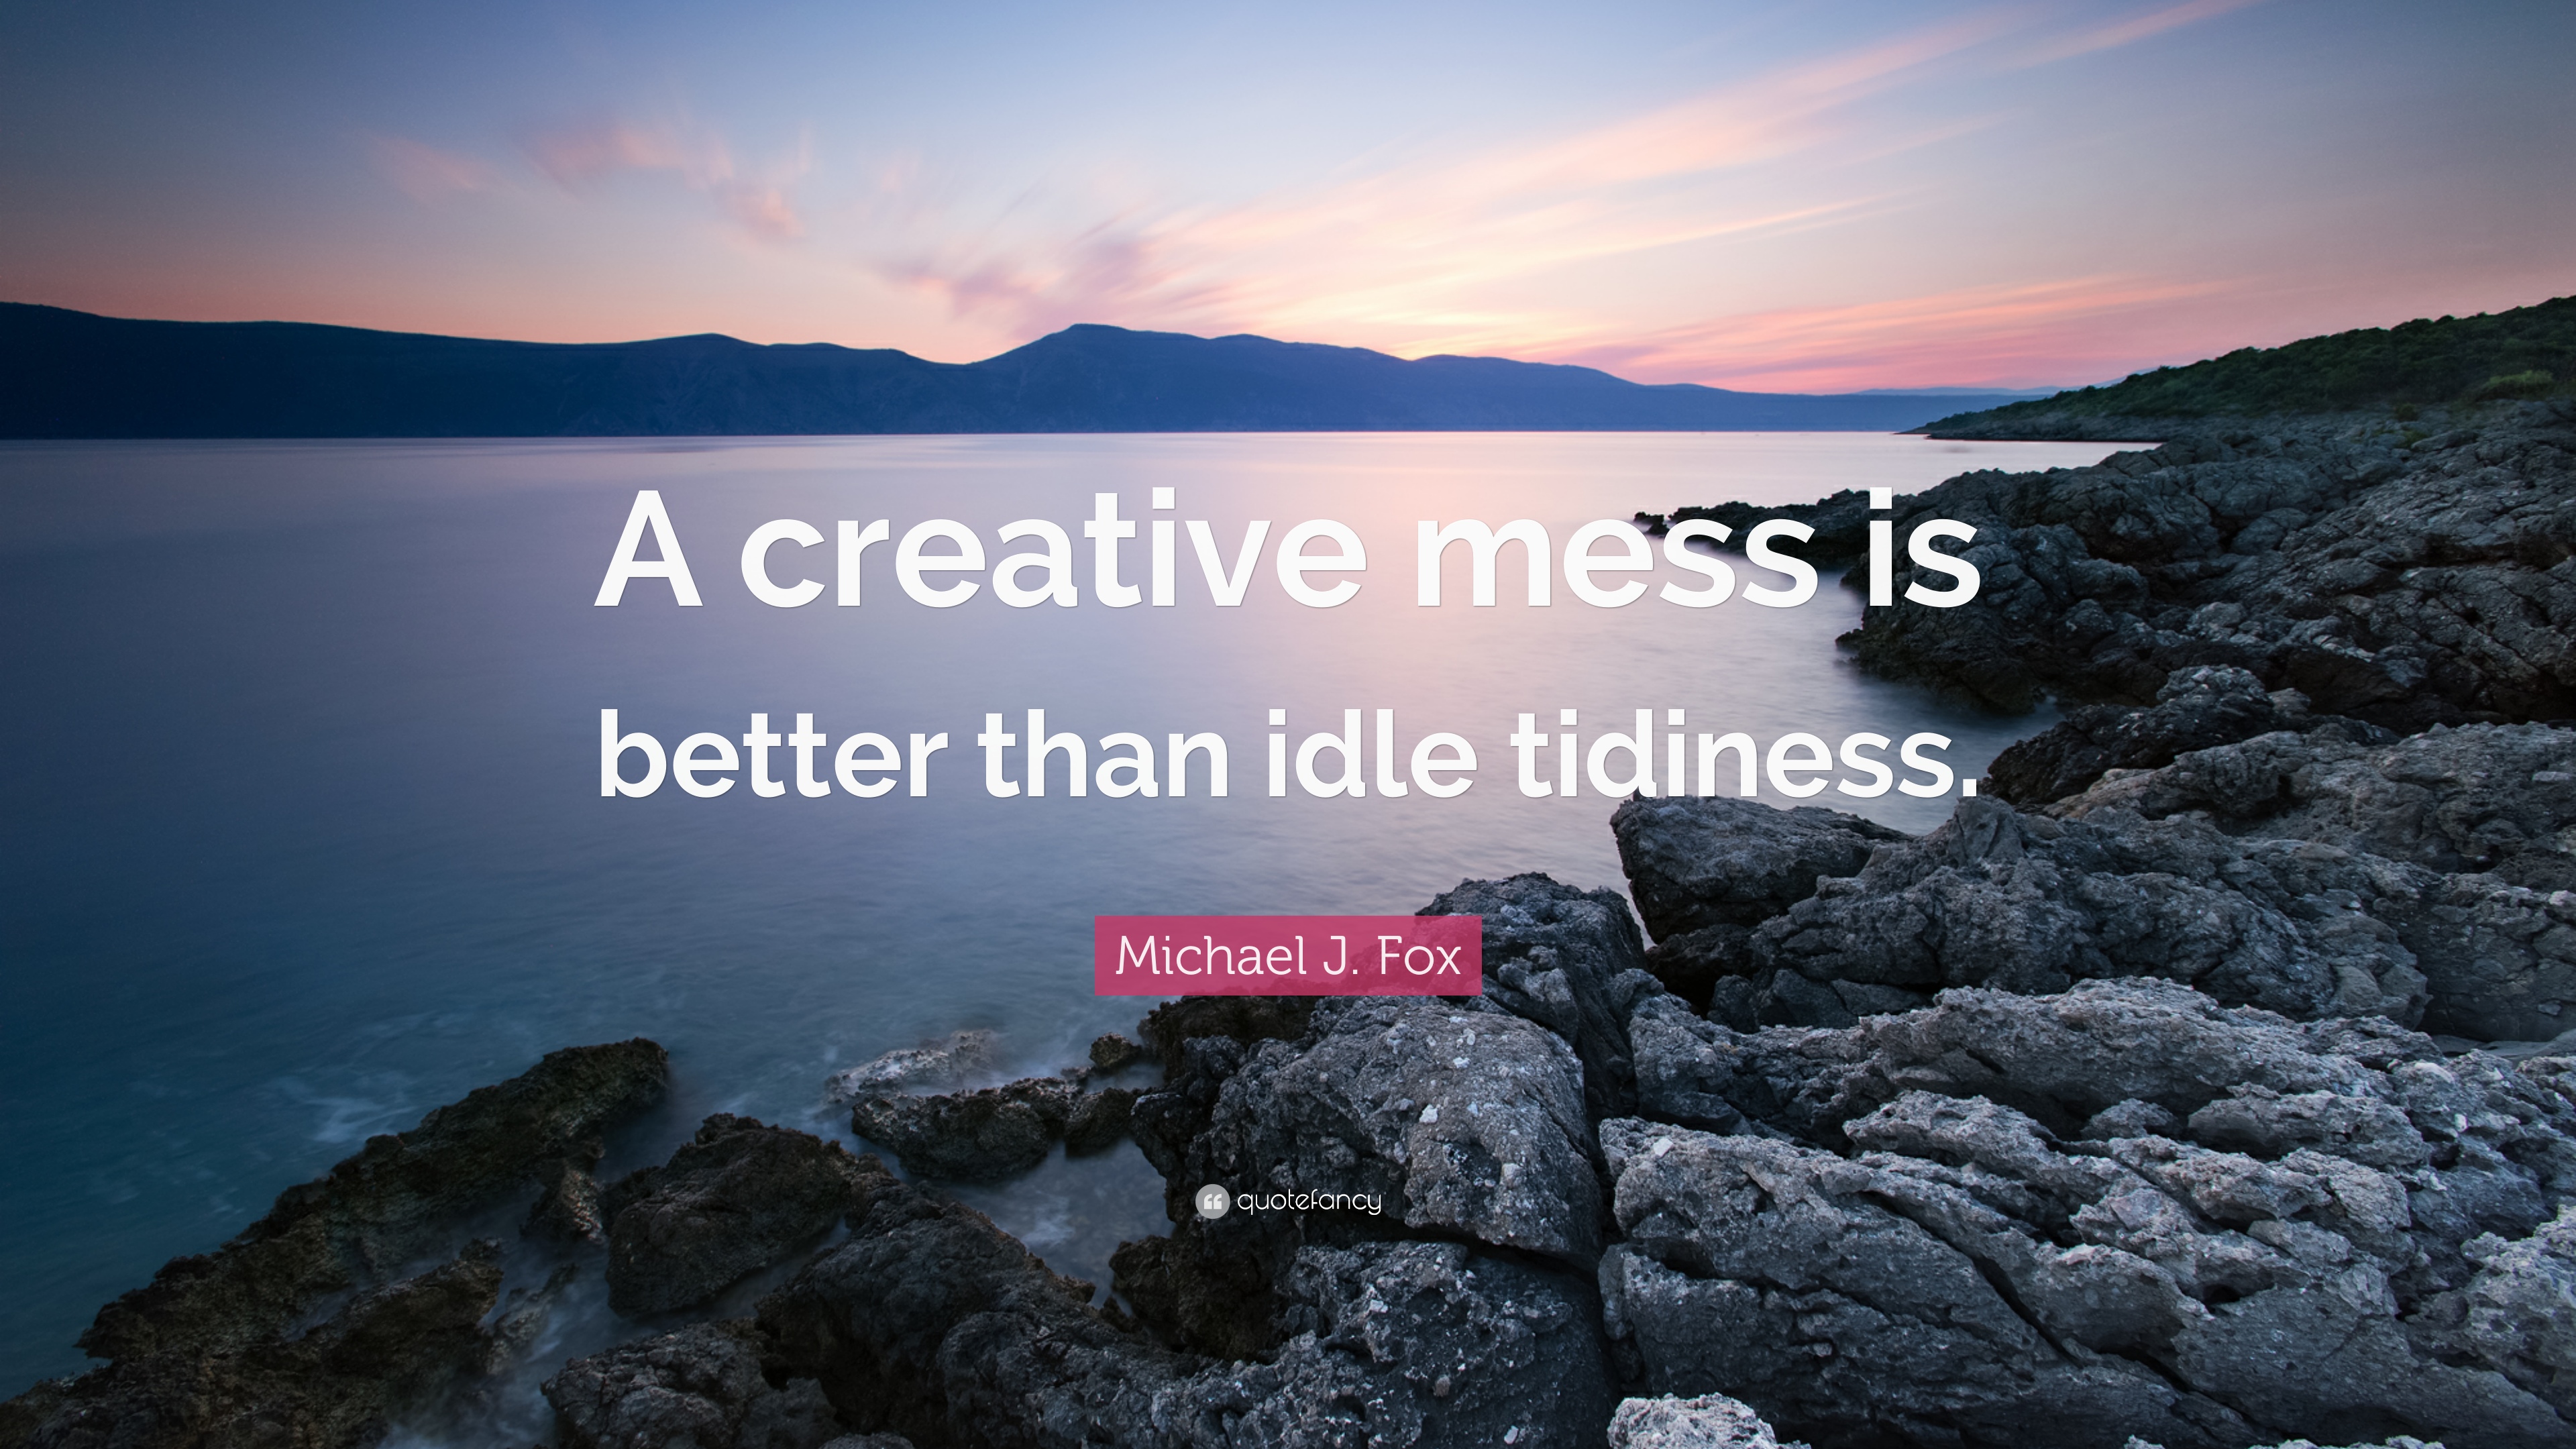 Michael J. Fox Quote: “A creative mess is better than idle